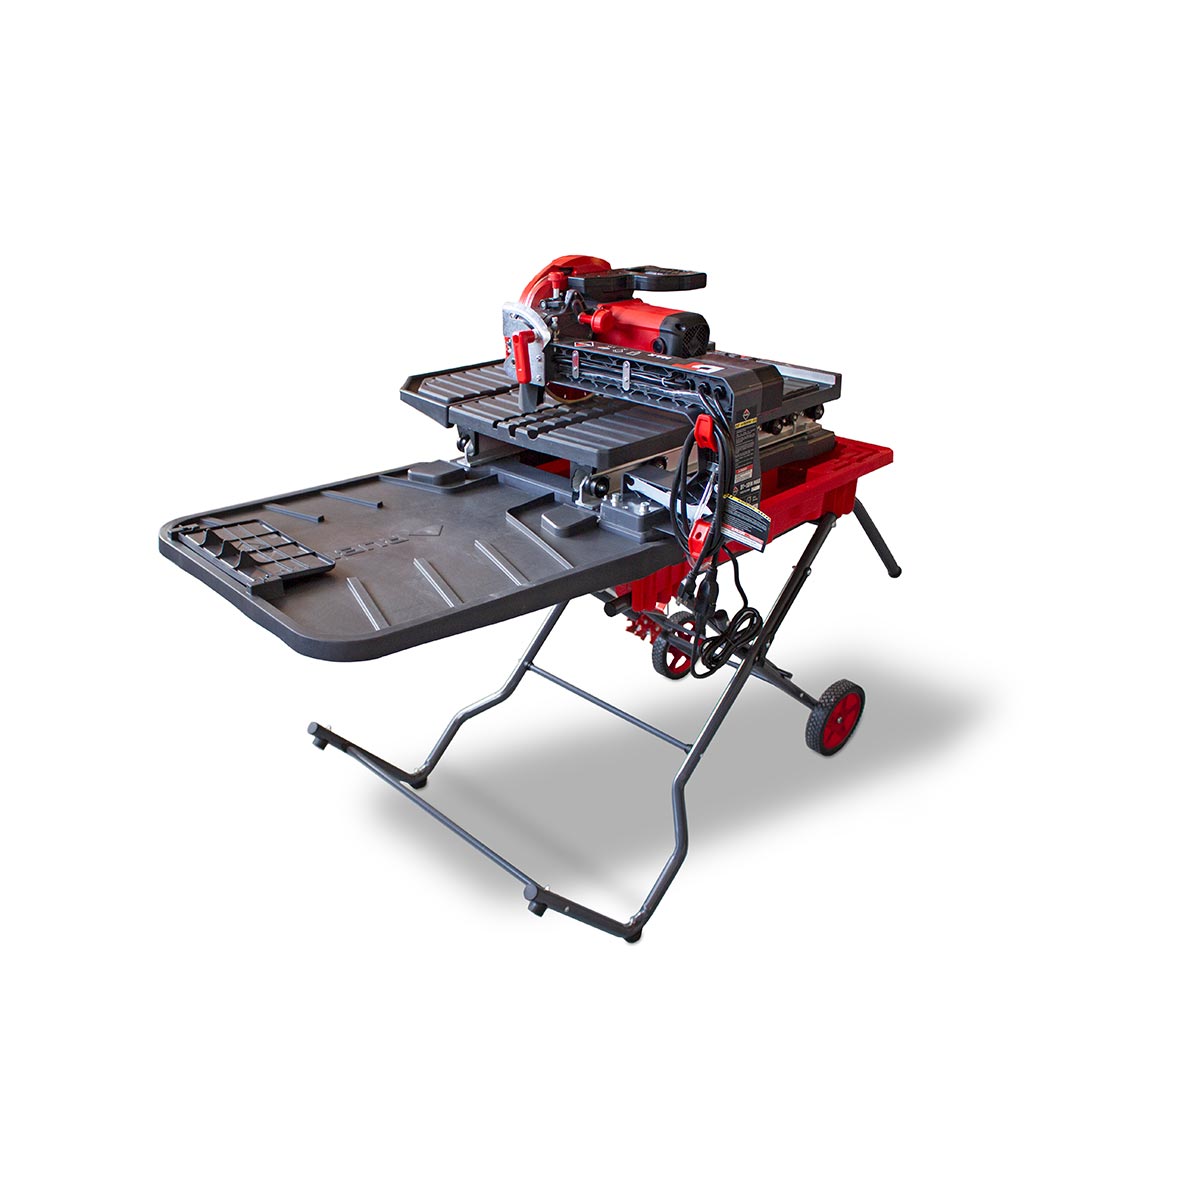 Rubi 36 inch Wet Tile Saw DT-10IN Max